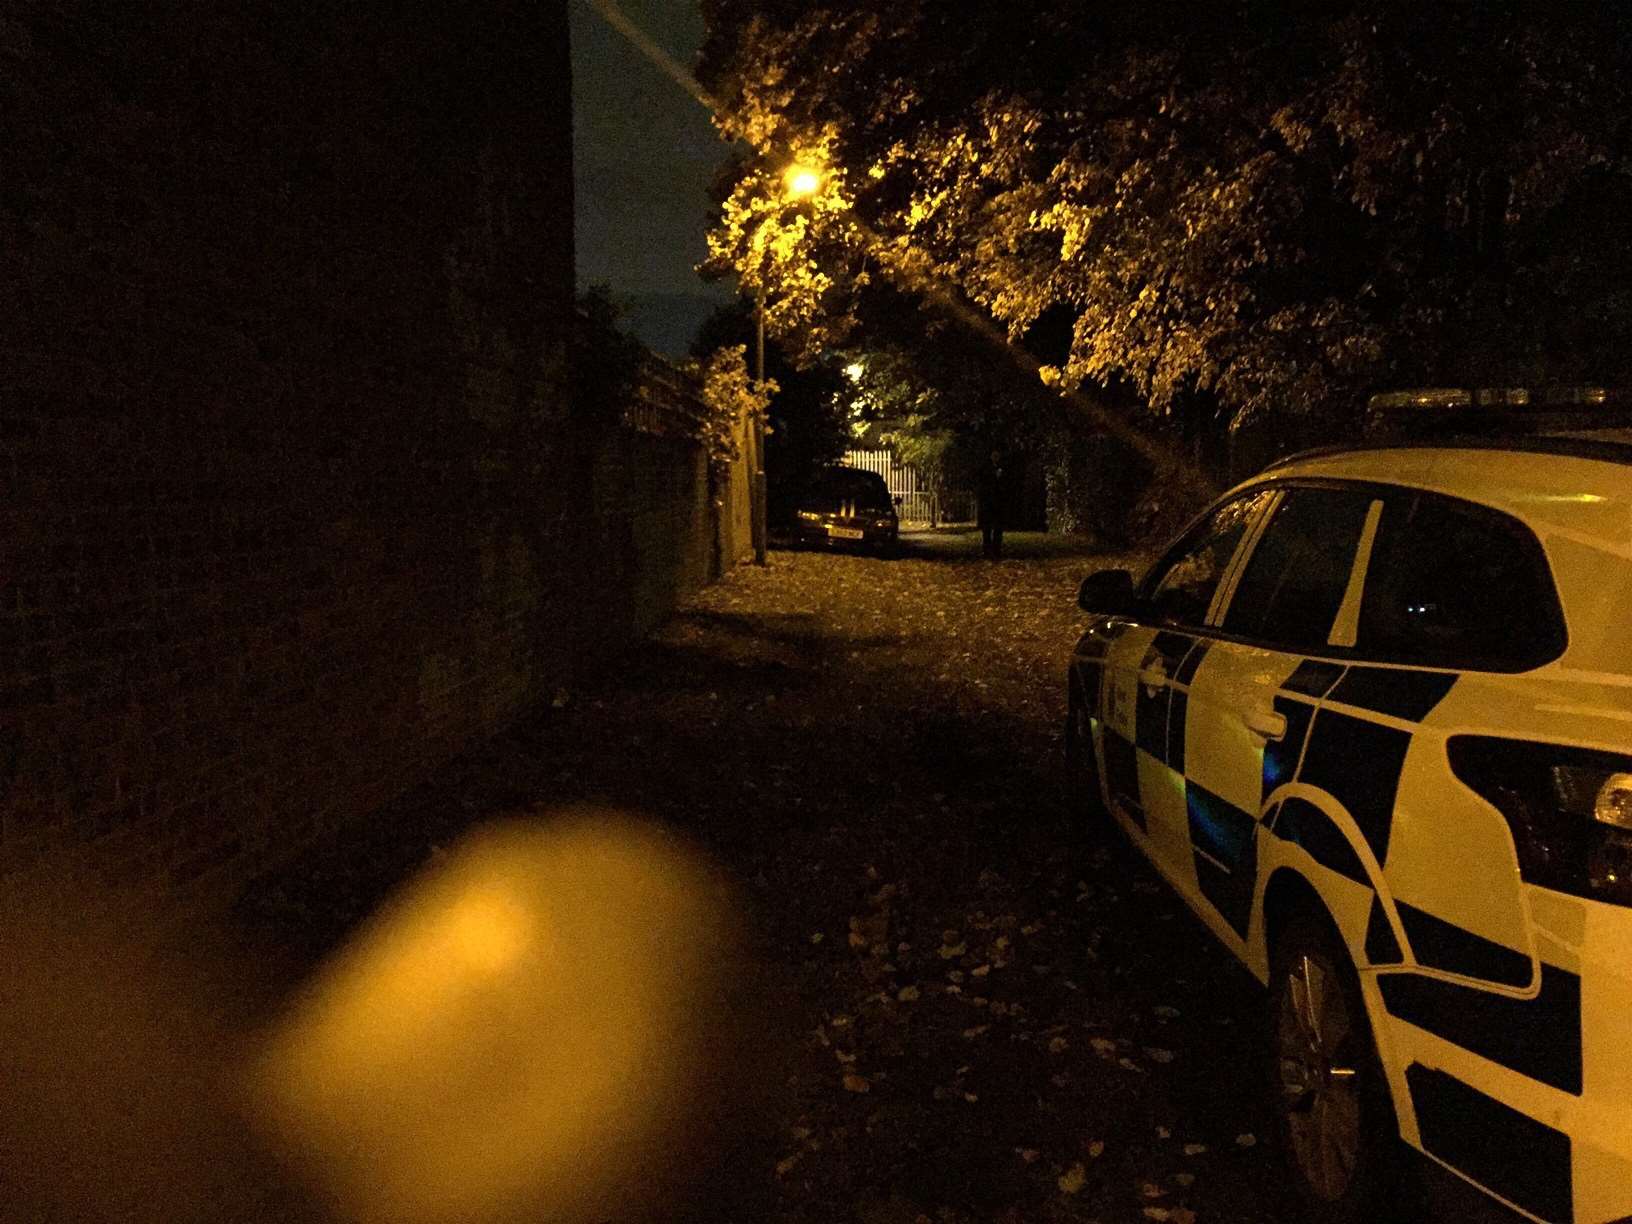 The car involved in the hit and run was dumped in an alleyway off London Road, Gravesend